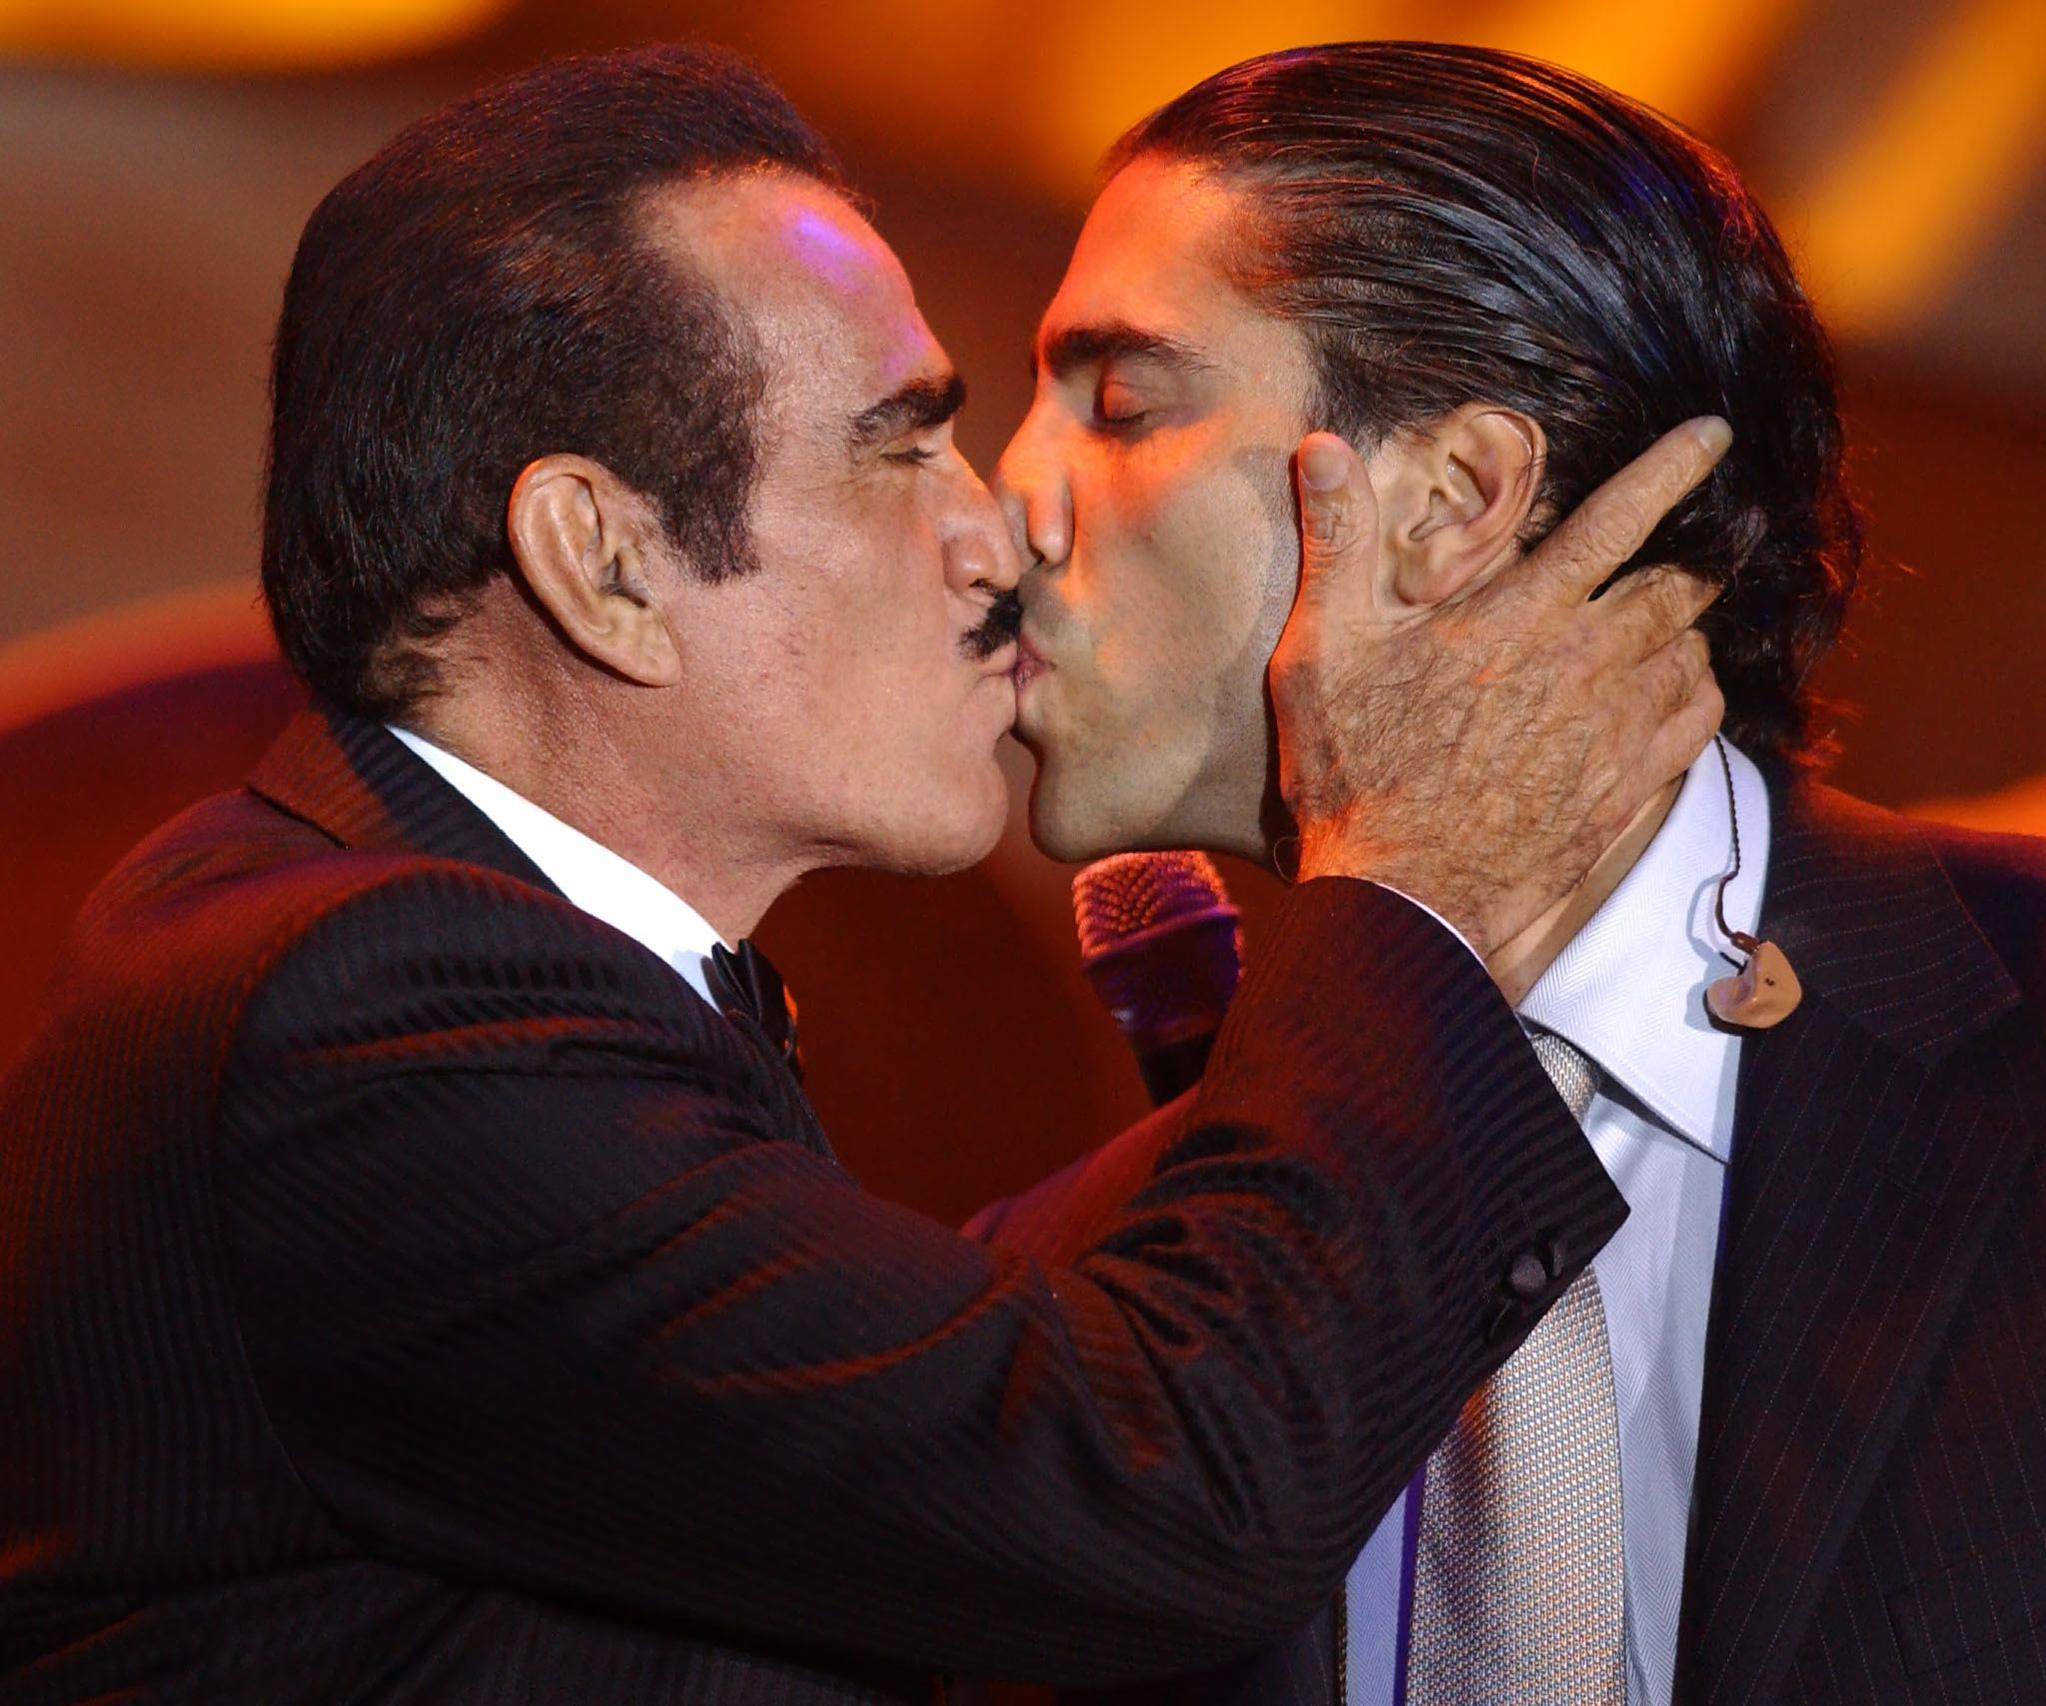 Vicente Fernandez (L) kisses his son, Alejandro Fernandez, after a duet at a tribute gala honoring him as the 2002 Latin Recording Academy (LARAS) Person of the Year, on September 17, 2002, in Hollywood, California. | Source: Getty Images